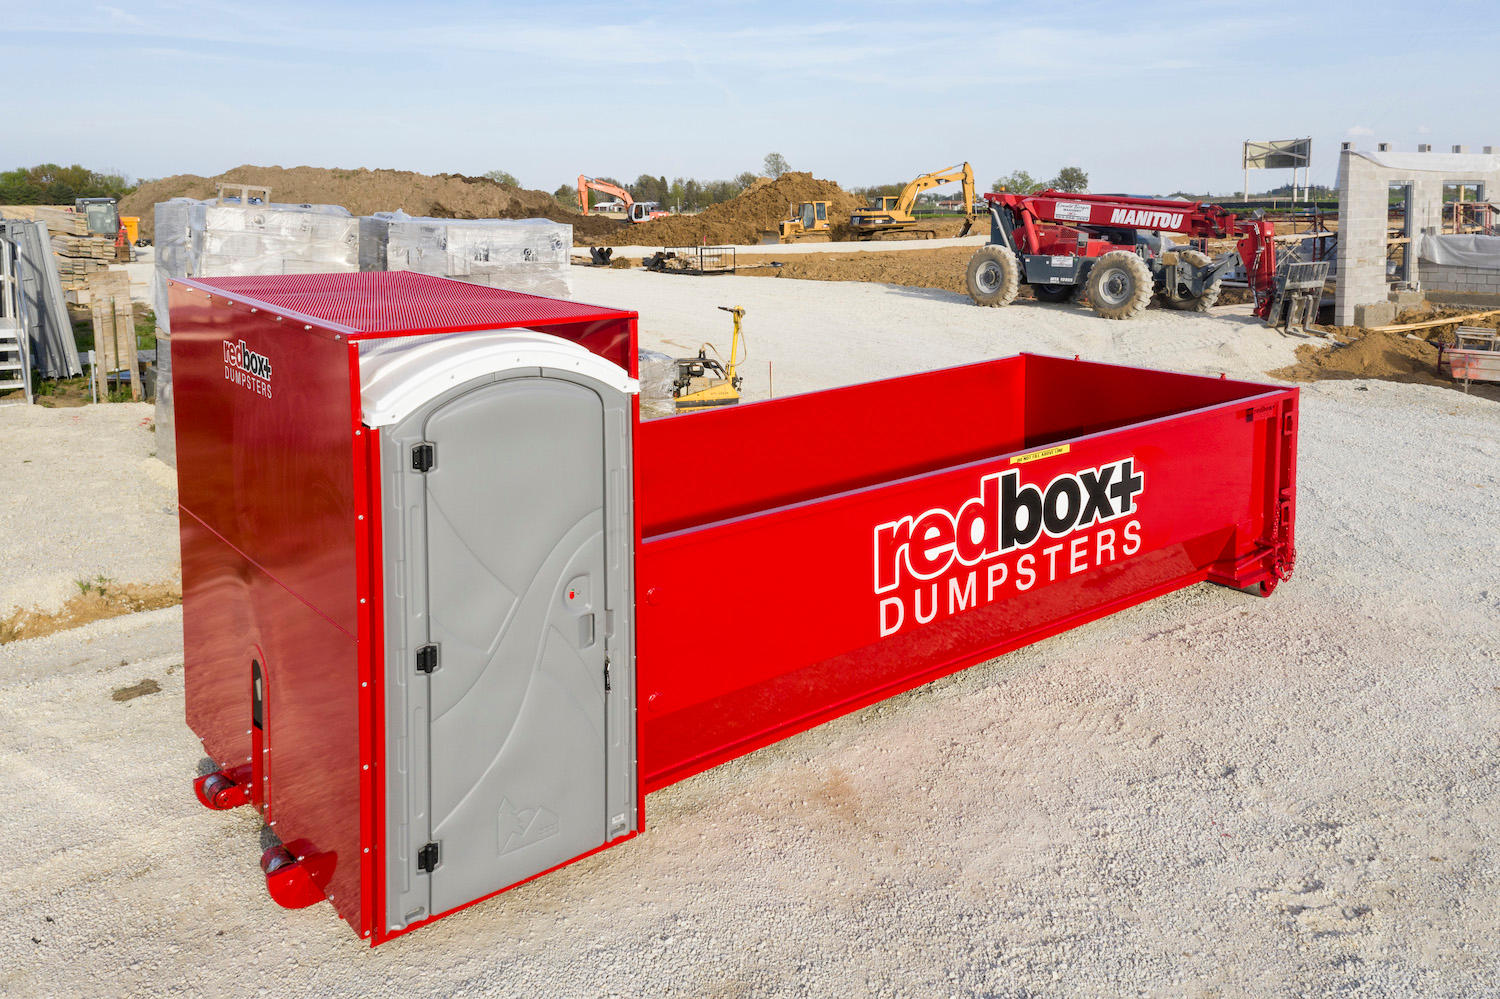 Dumpster rentals for commercial and residential